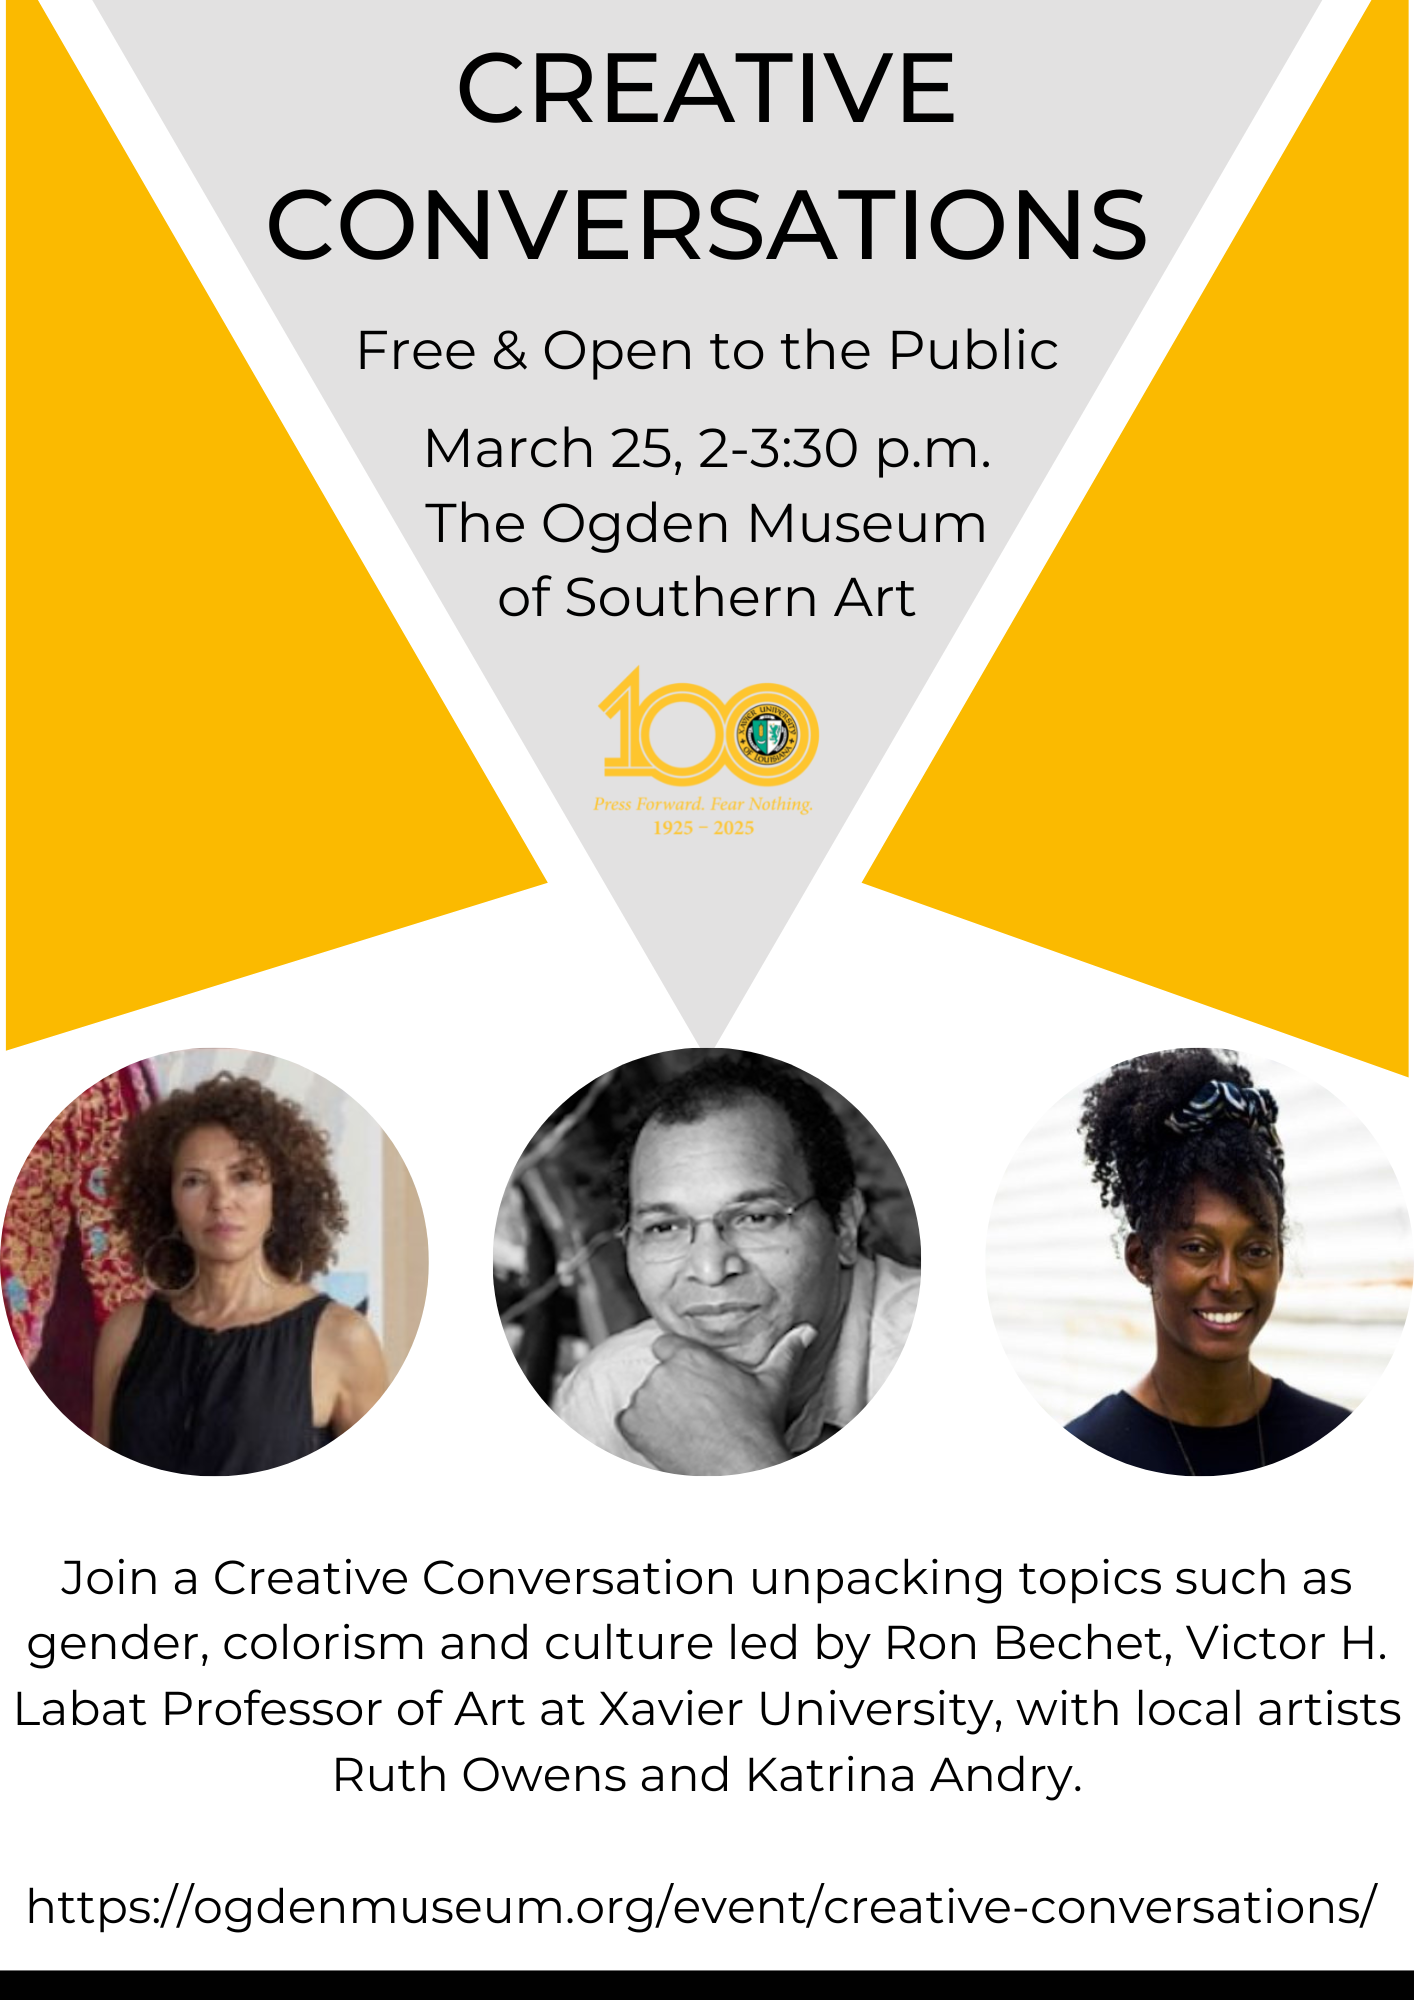 Join a Creative Conversation unpacking topics such as gender, colorism and culture led by Ron Bechet, Victor H. Labat Professor of Art at Xavier University, with local artists Ruth Owens and Katrina Andry.